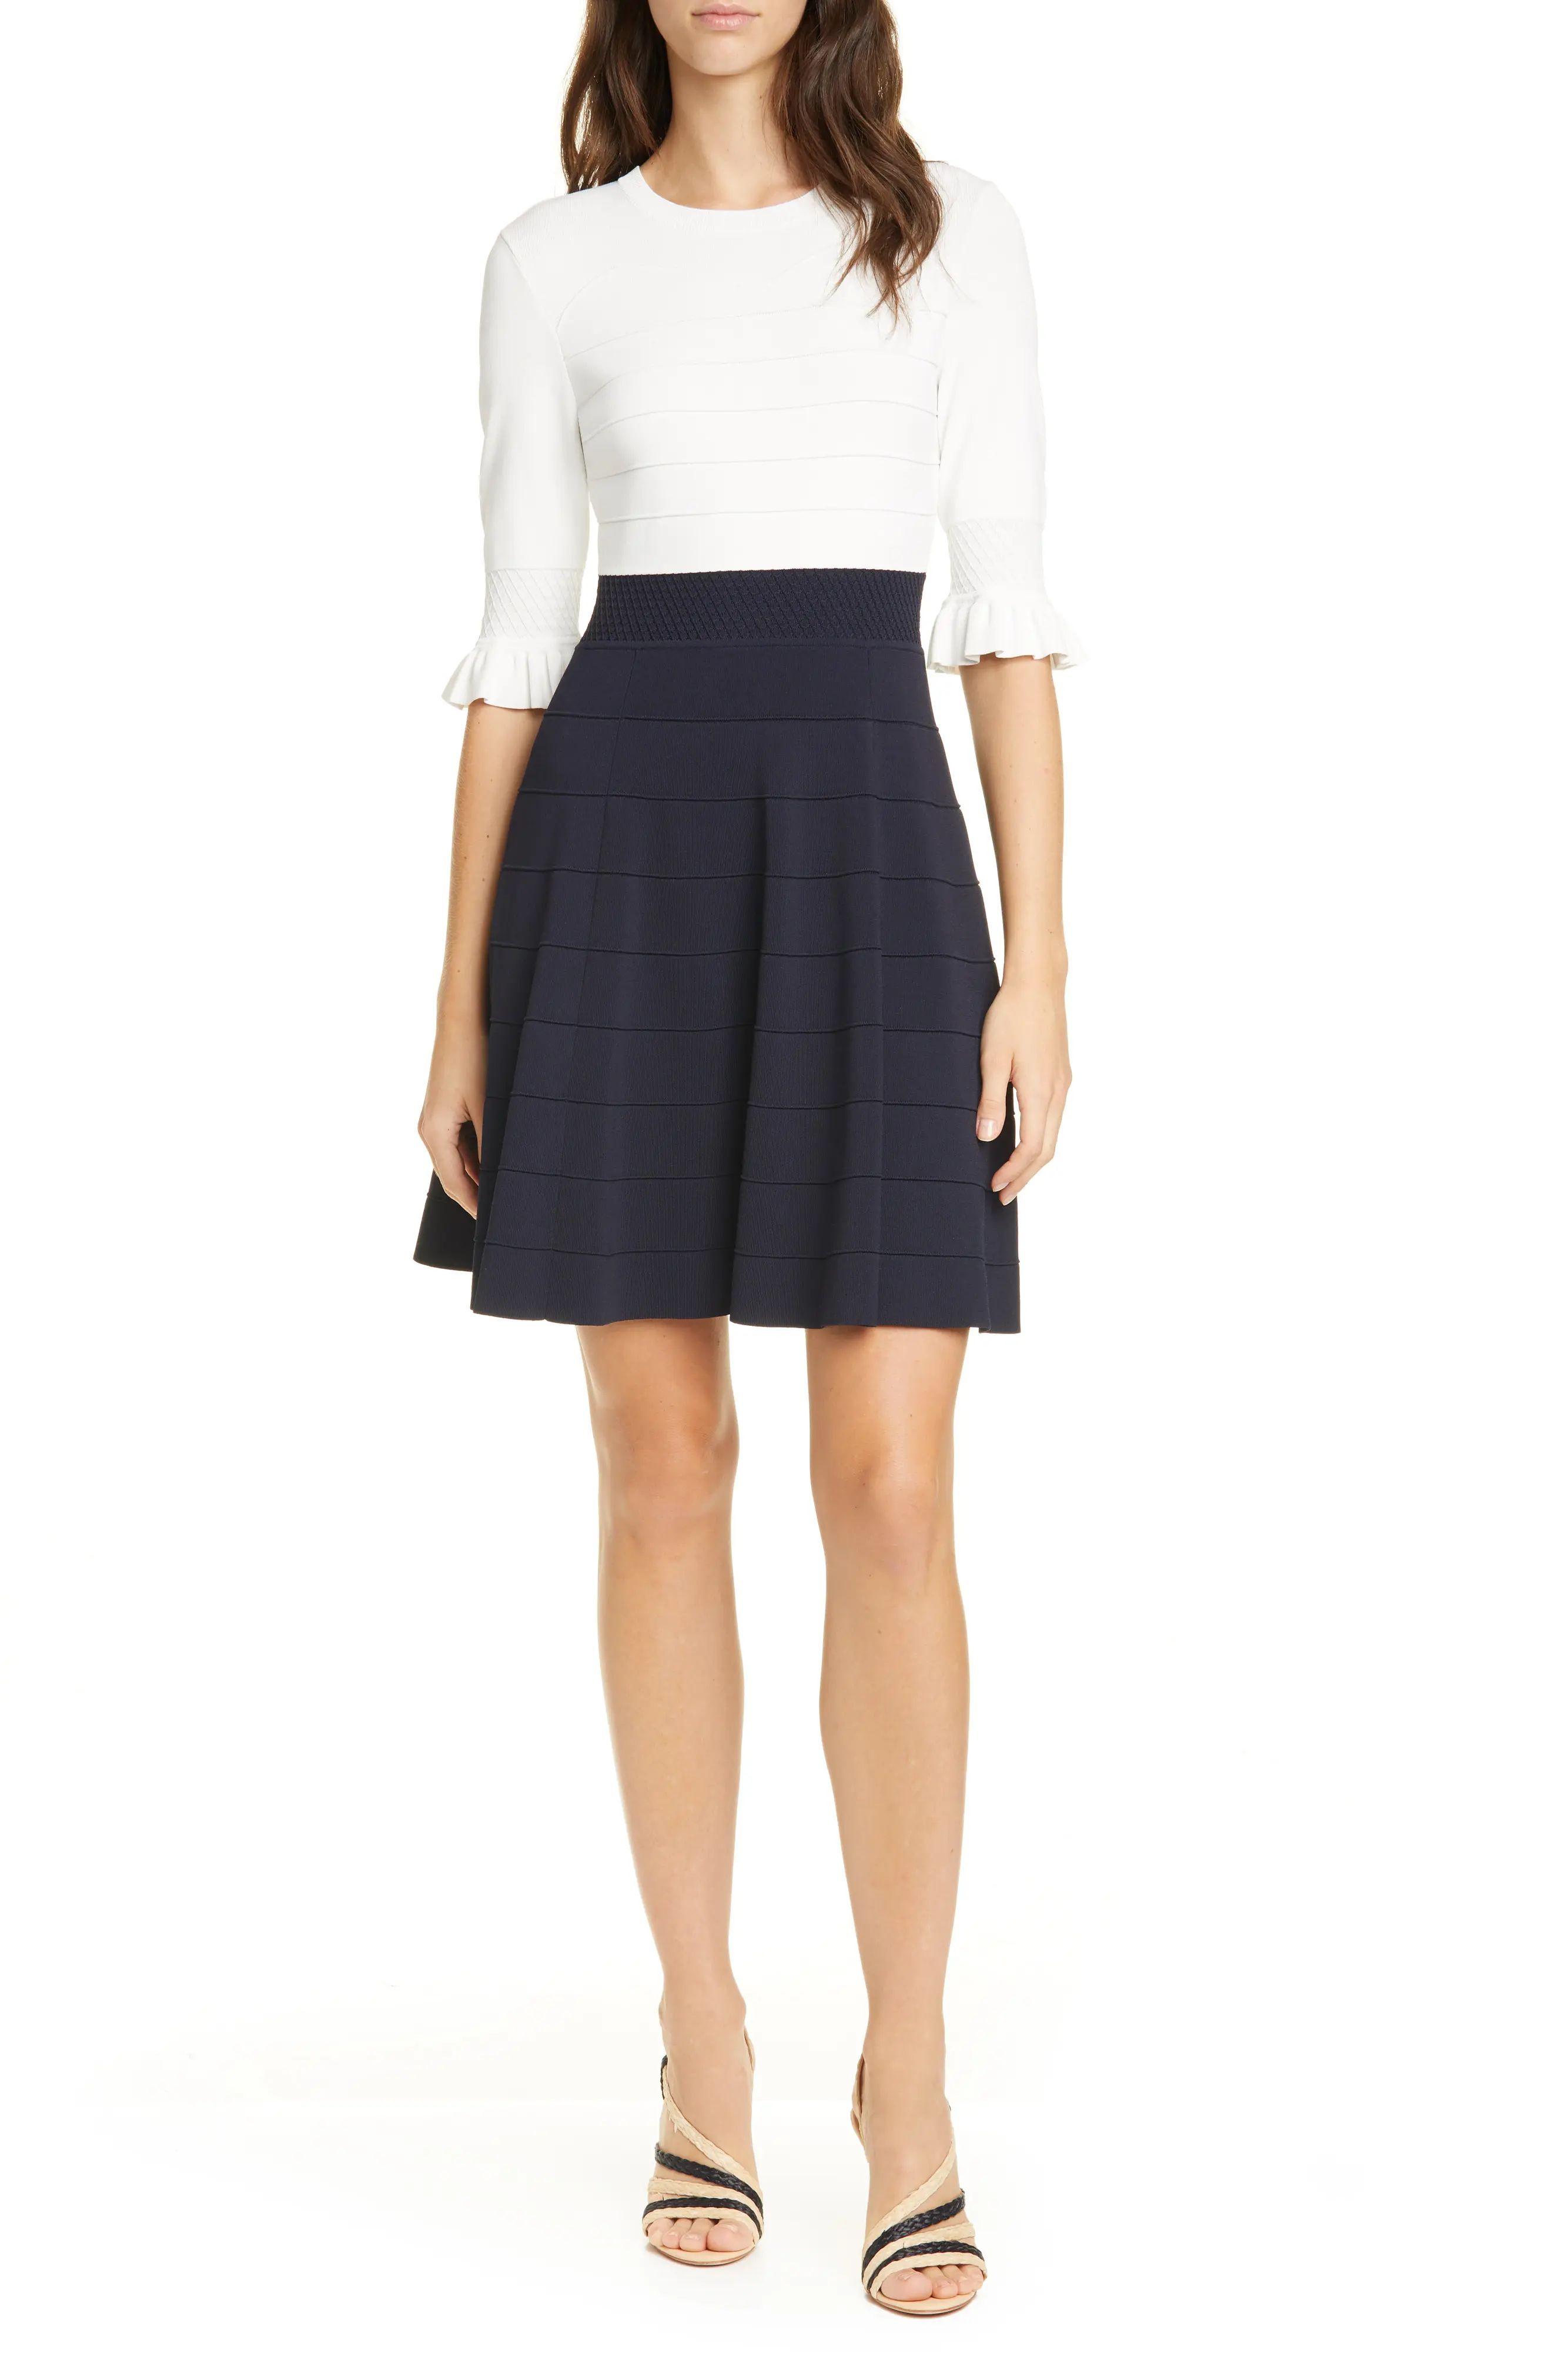 Women's Ted Baker London Lauron Fit & Flare Sweater Dress, Size 3 (fits like 8-10 US) - Blue | Nordstrom